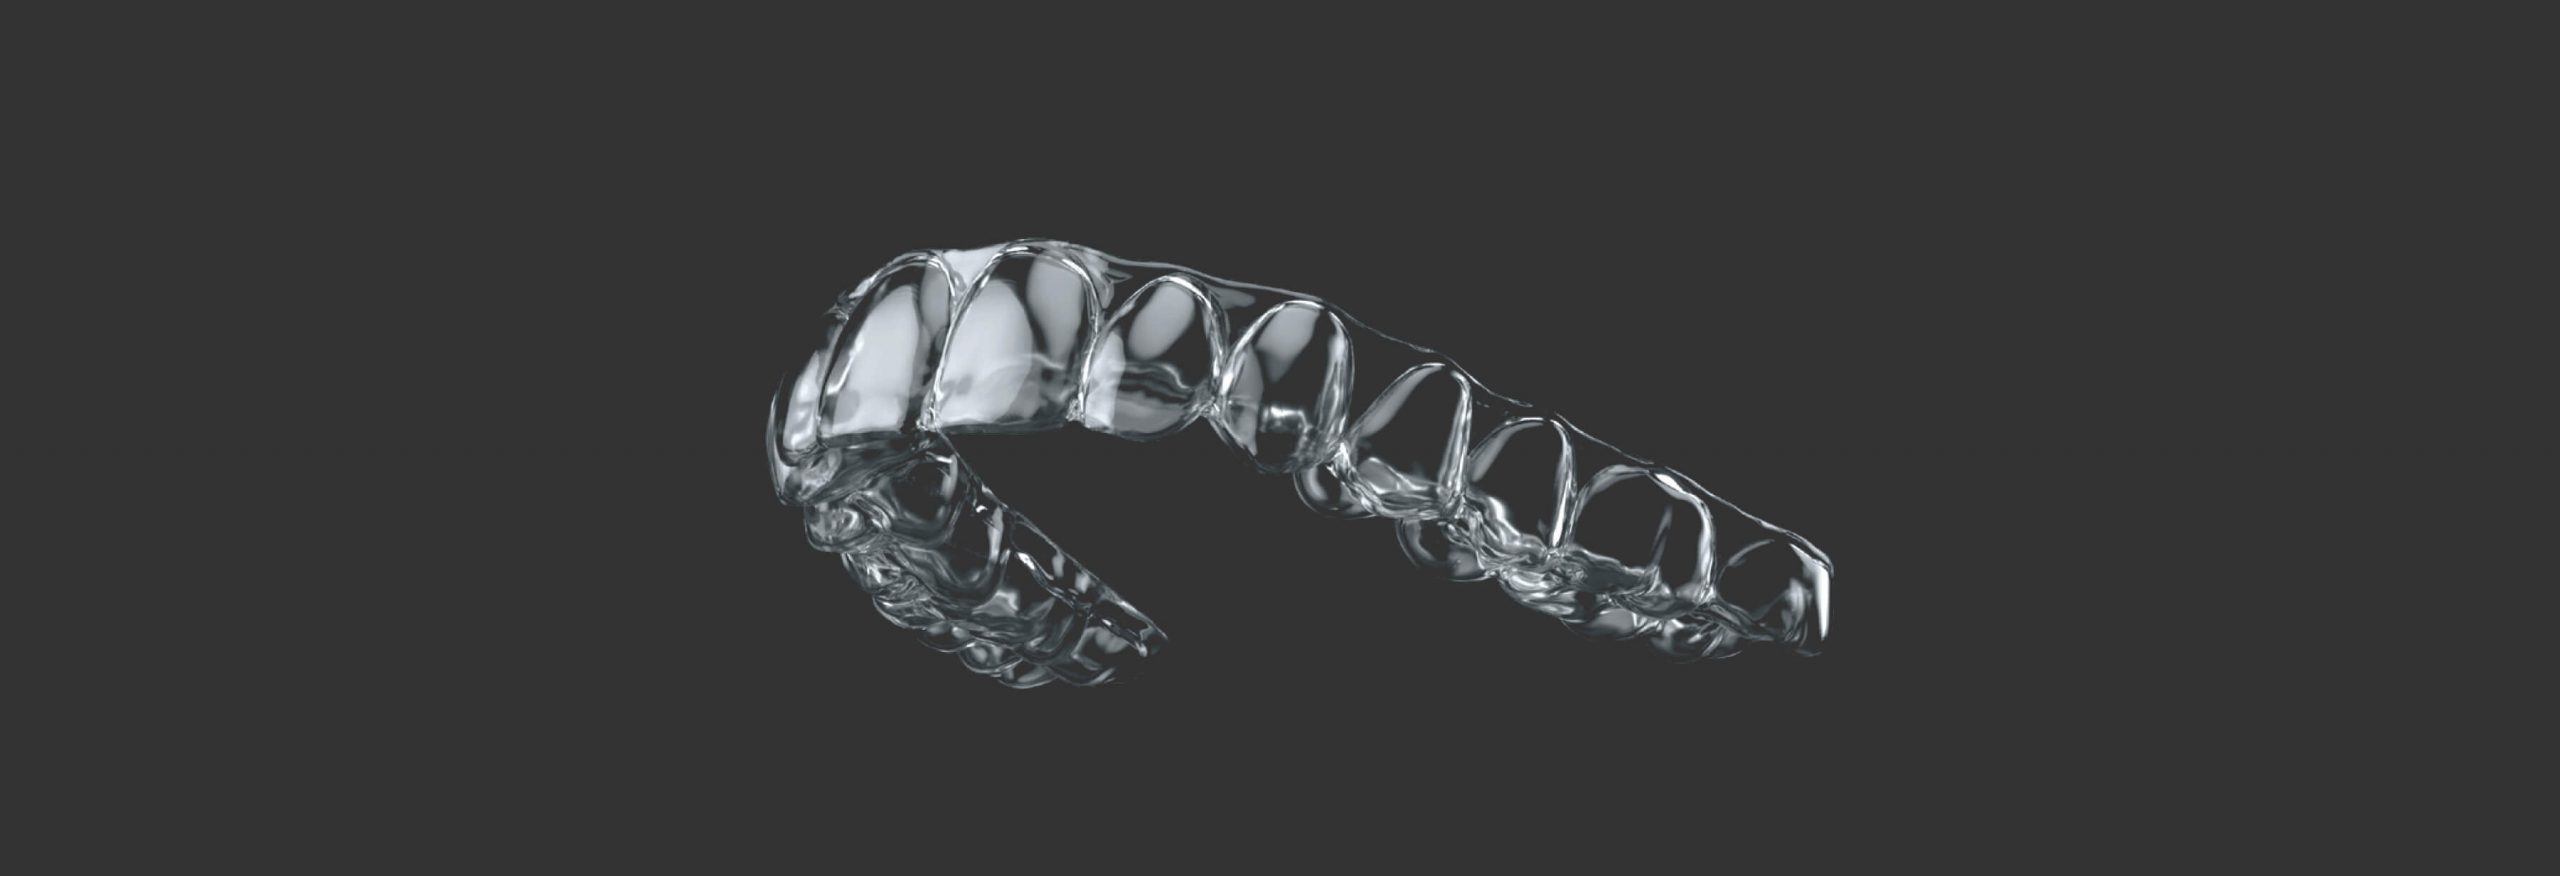 Aligning with Change: The Growing Preference for Clear Aligners